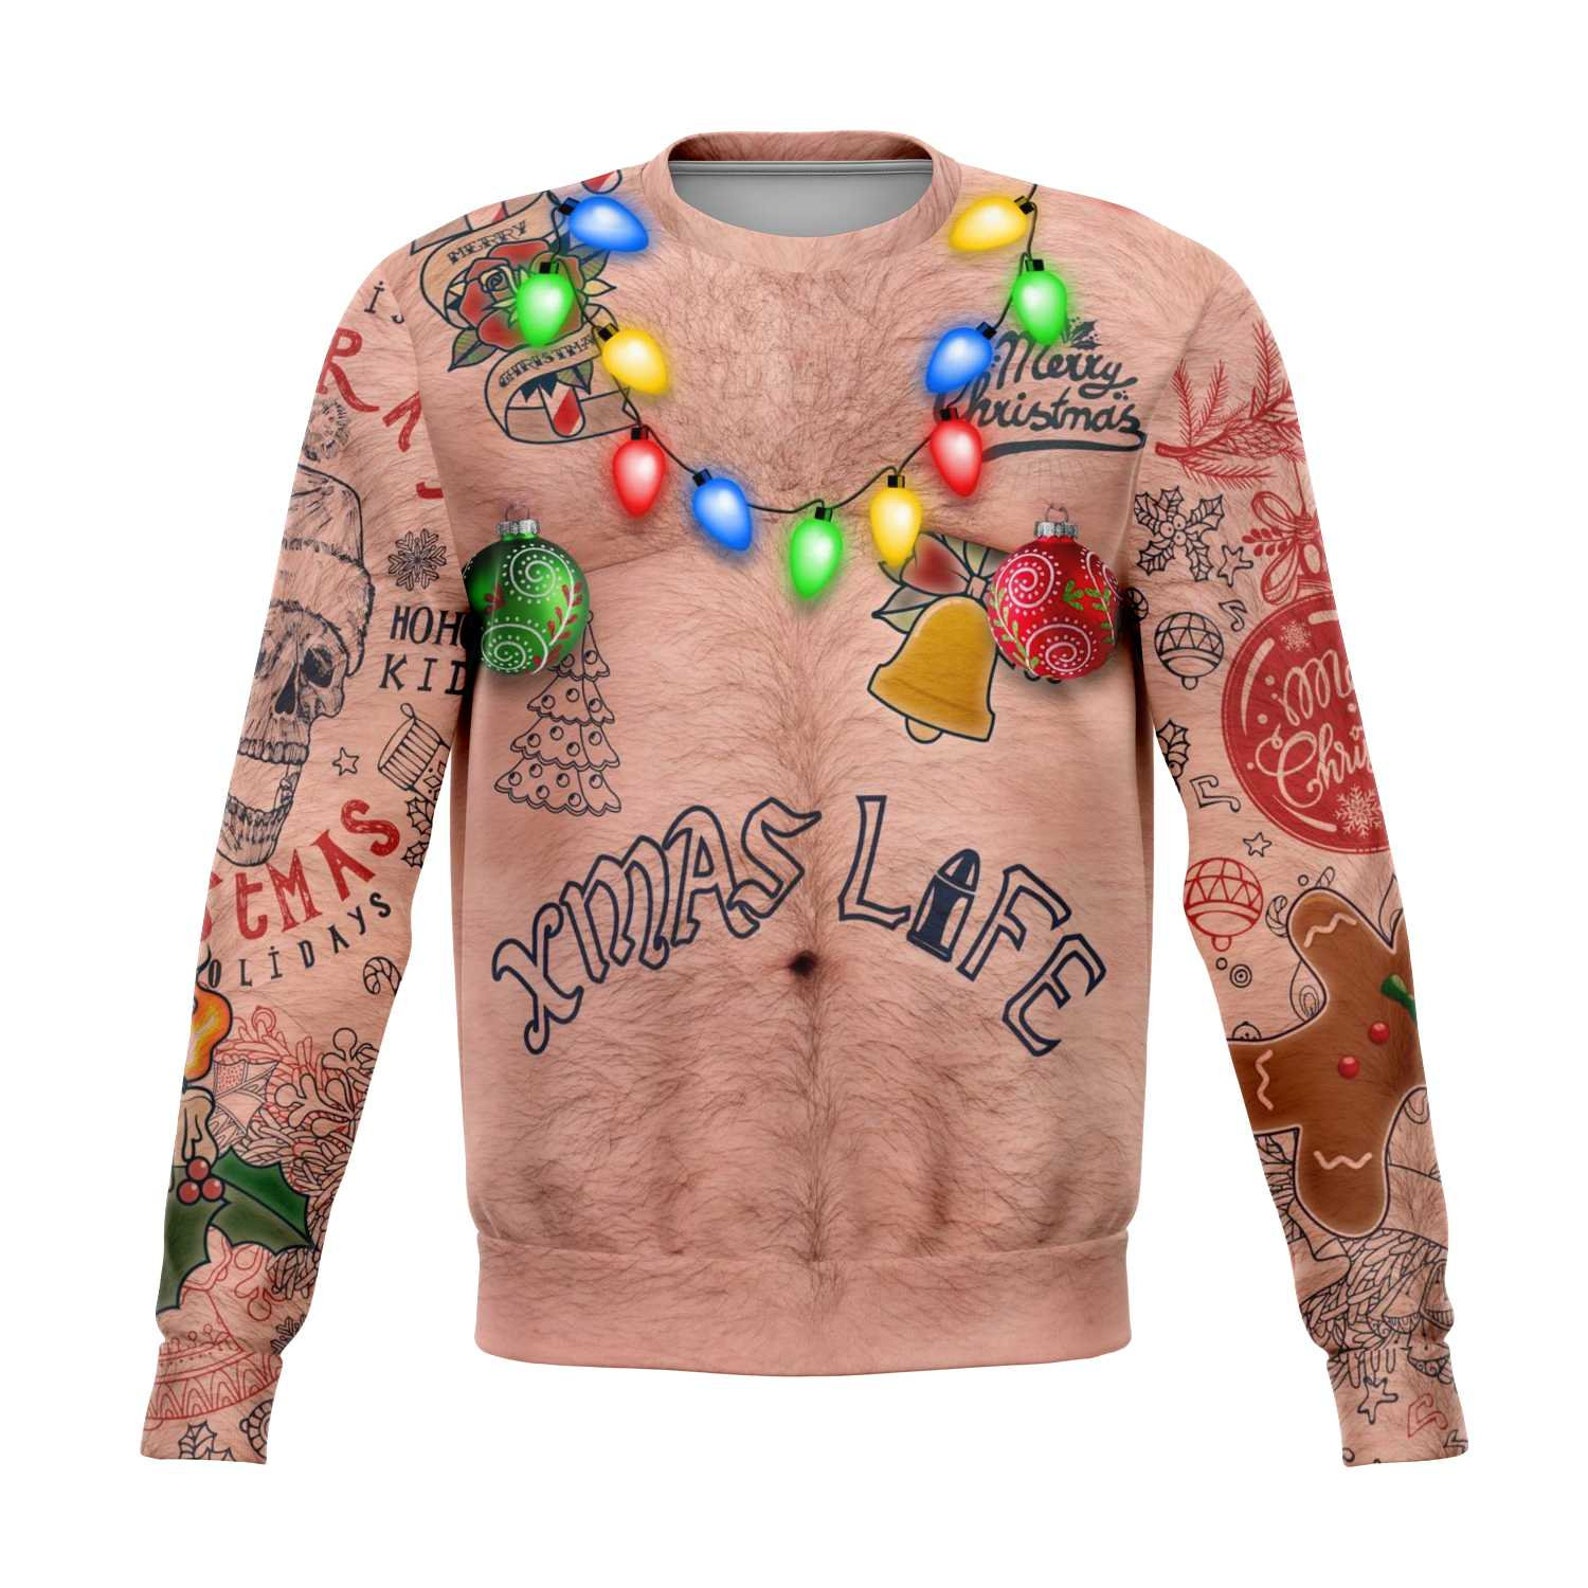 Topless Ugly Christmas Jumper Sweatshirt Bare Chest Naked image 1.